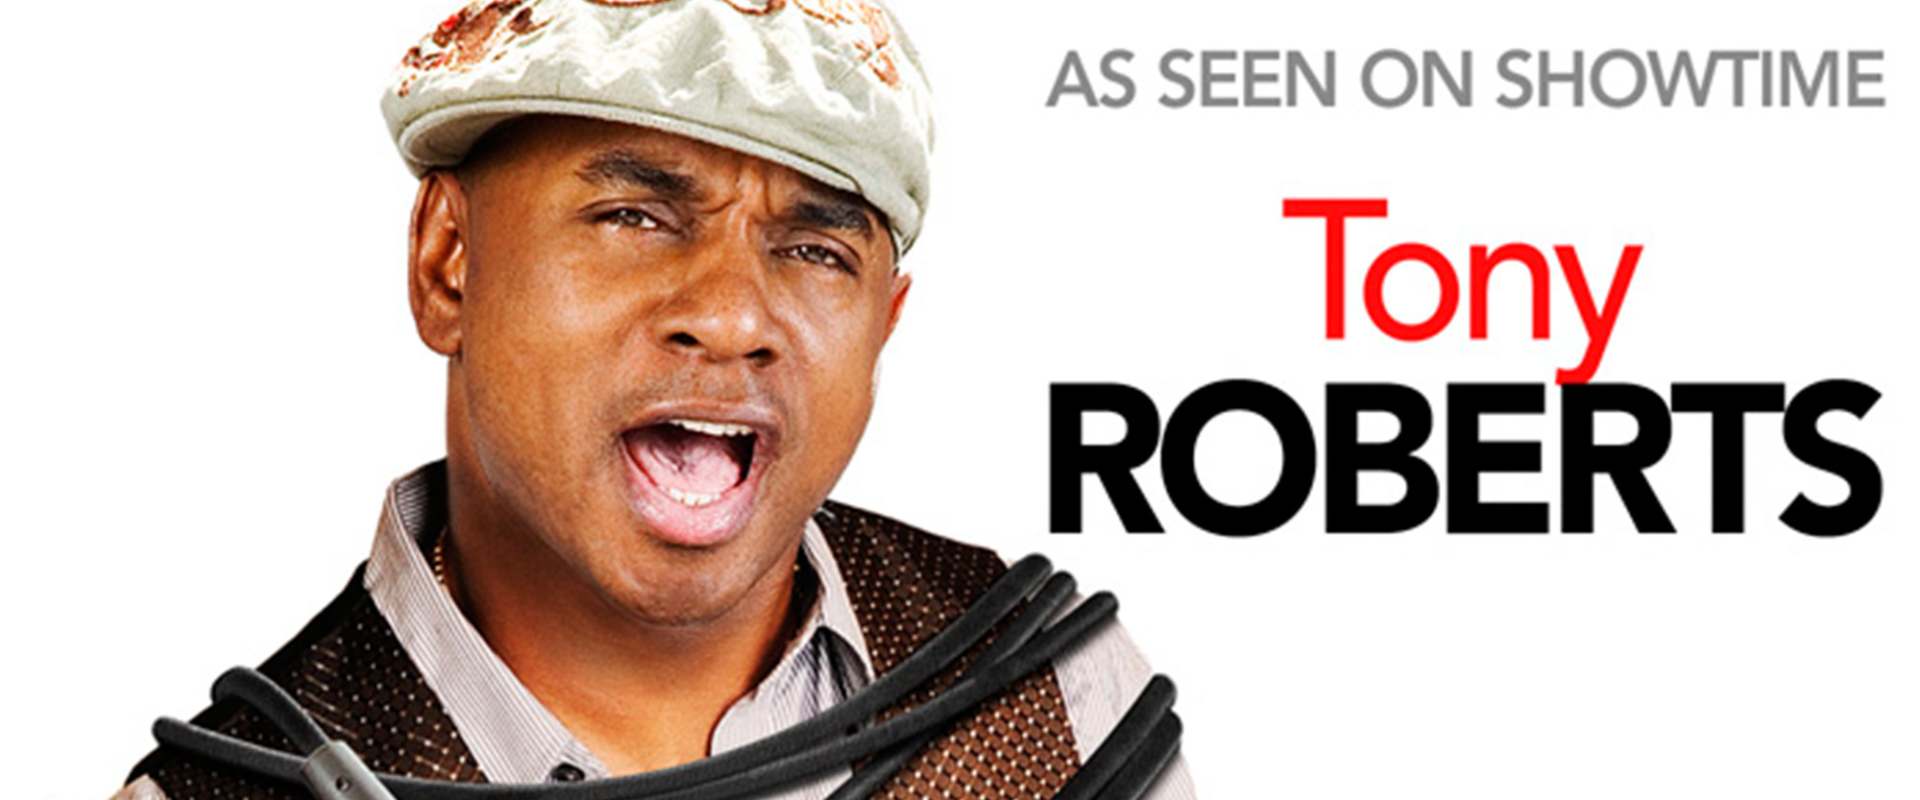 Watch Tony Roberts Wired! on Netflix Today!